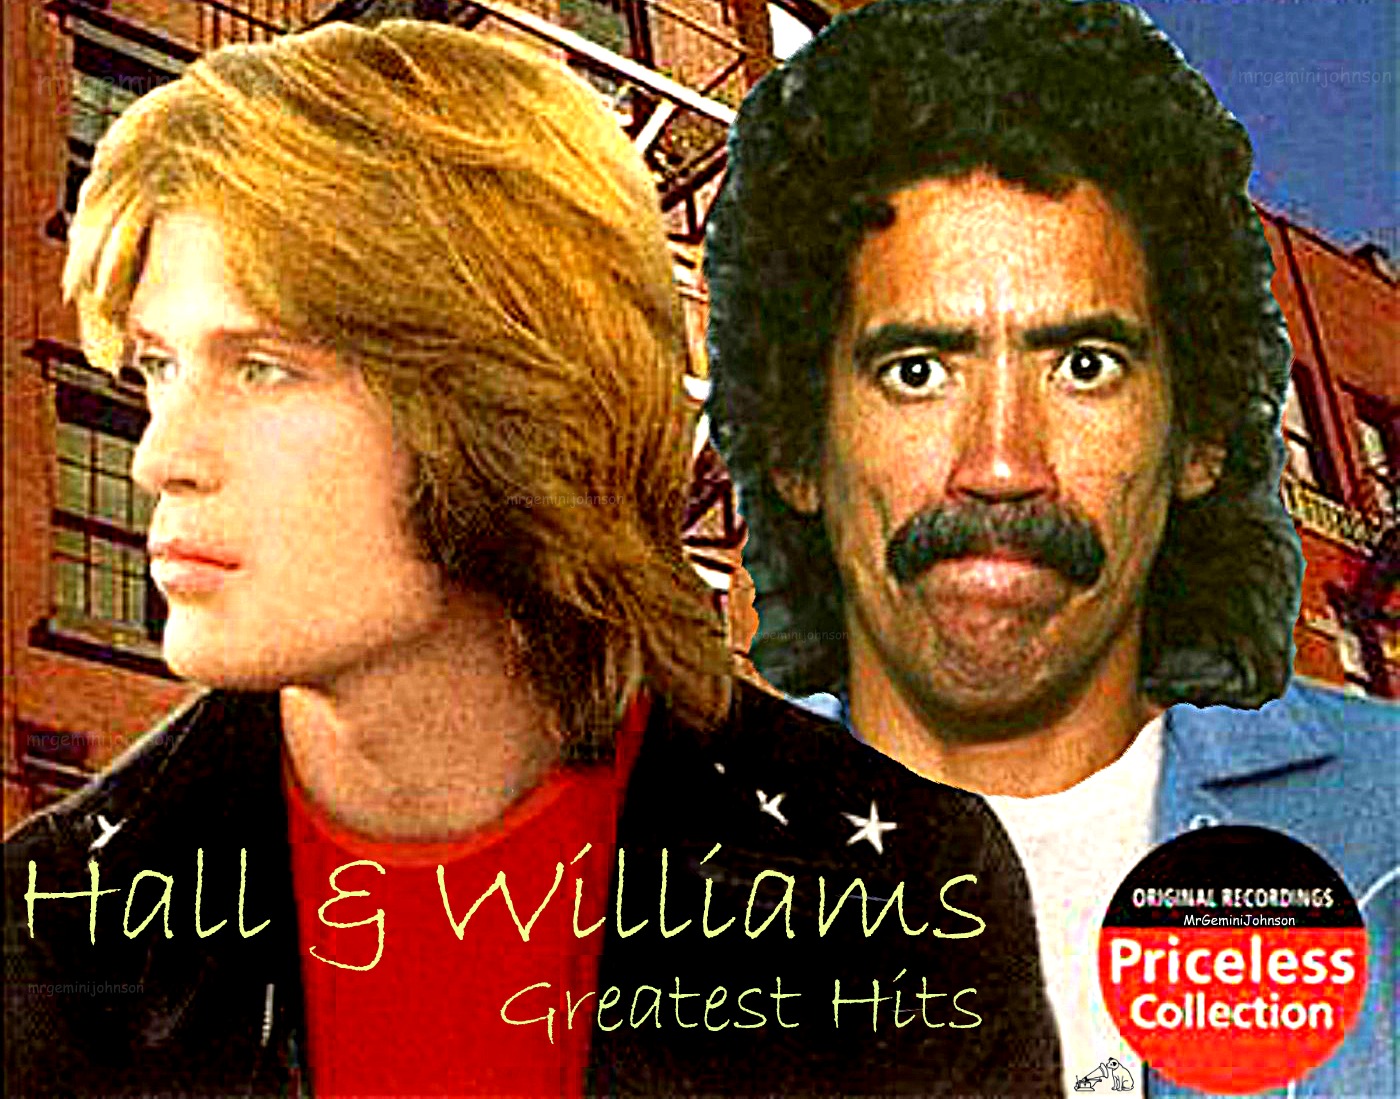 Fake album cover with Darryl Hall and Ted Williams